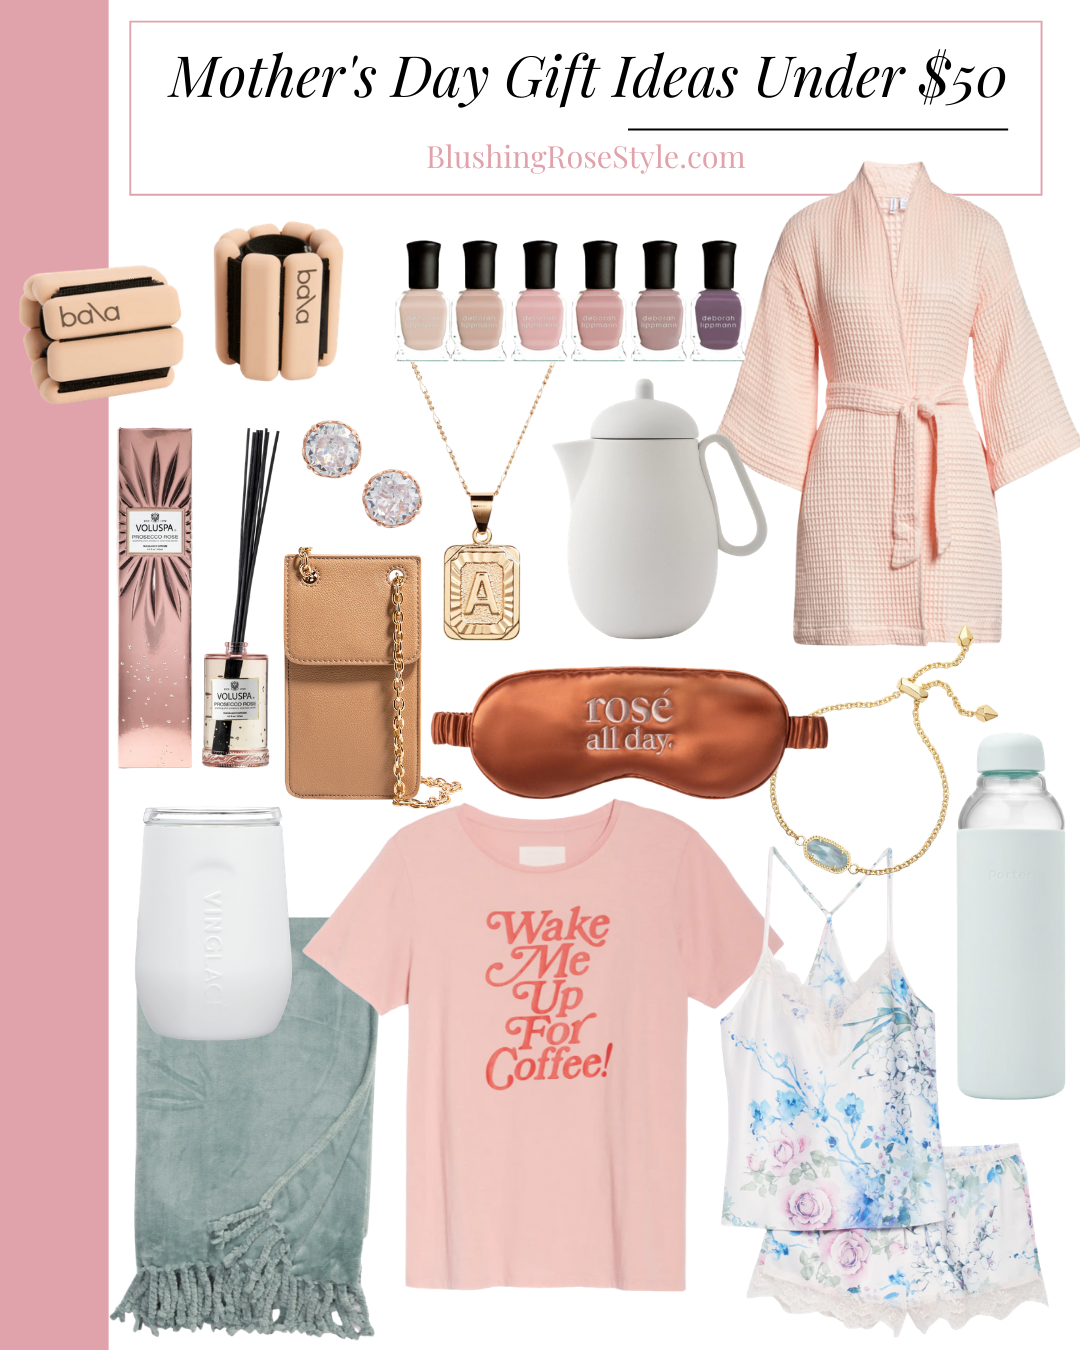 Gifts For Her: Under $50 and Under $100 - Blushing Rose Style Blog